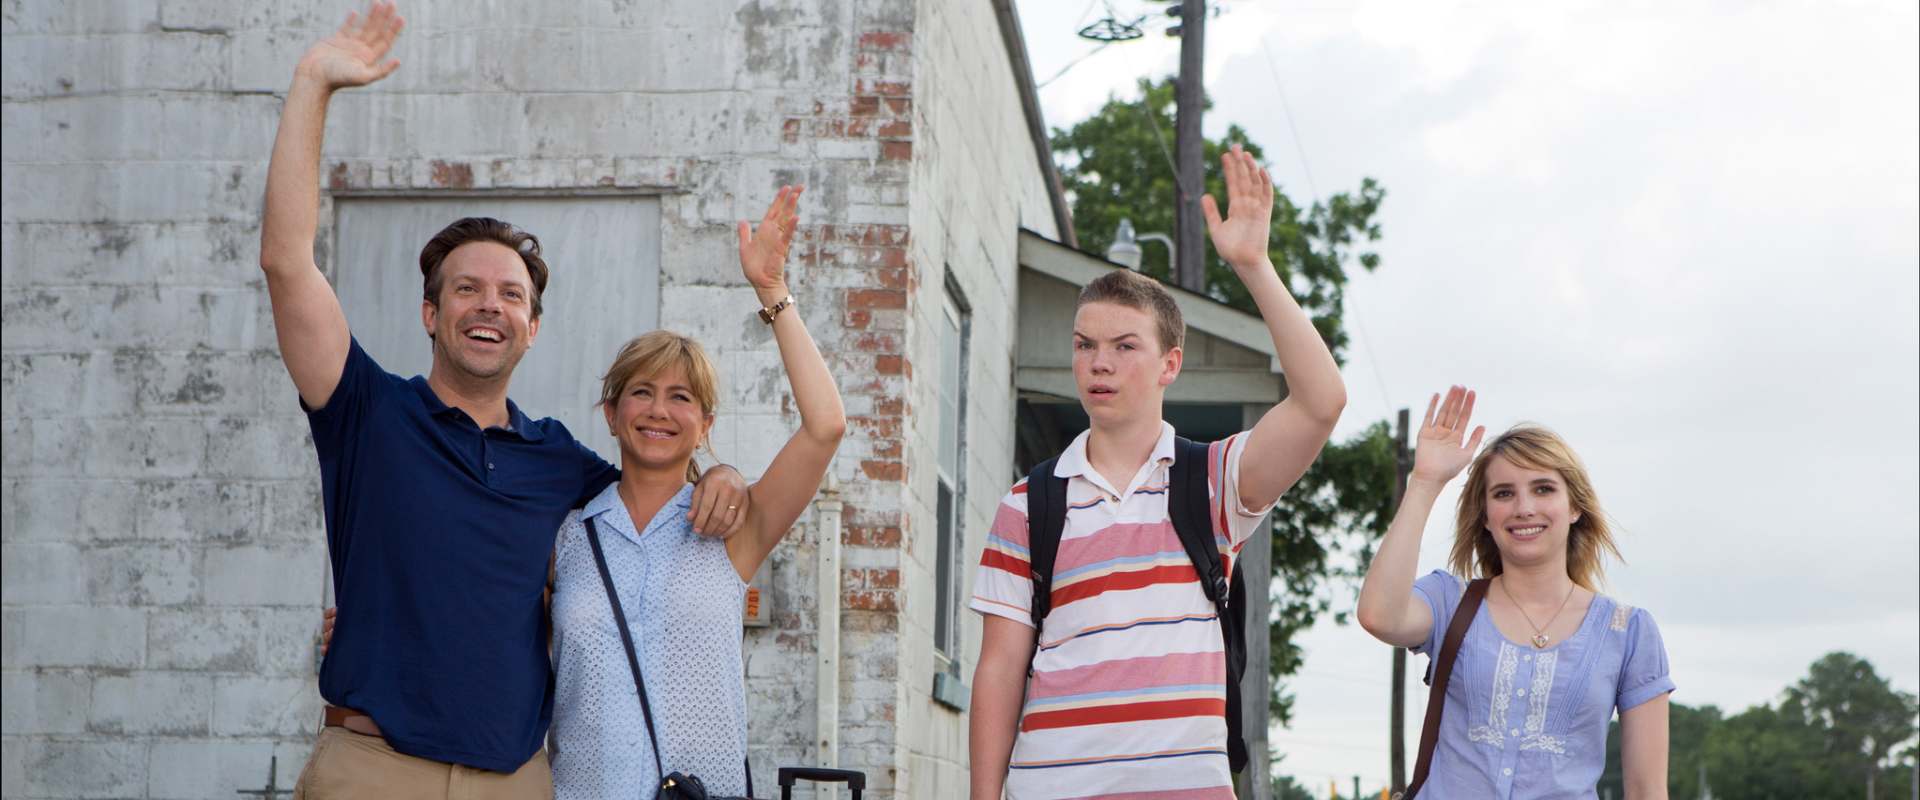 We're the Millers background 1